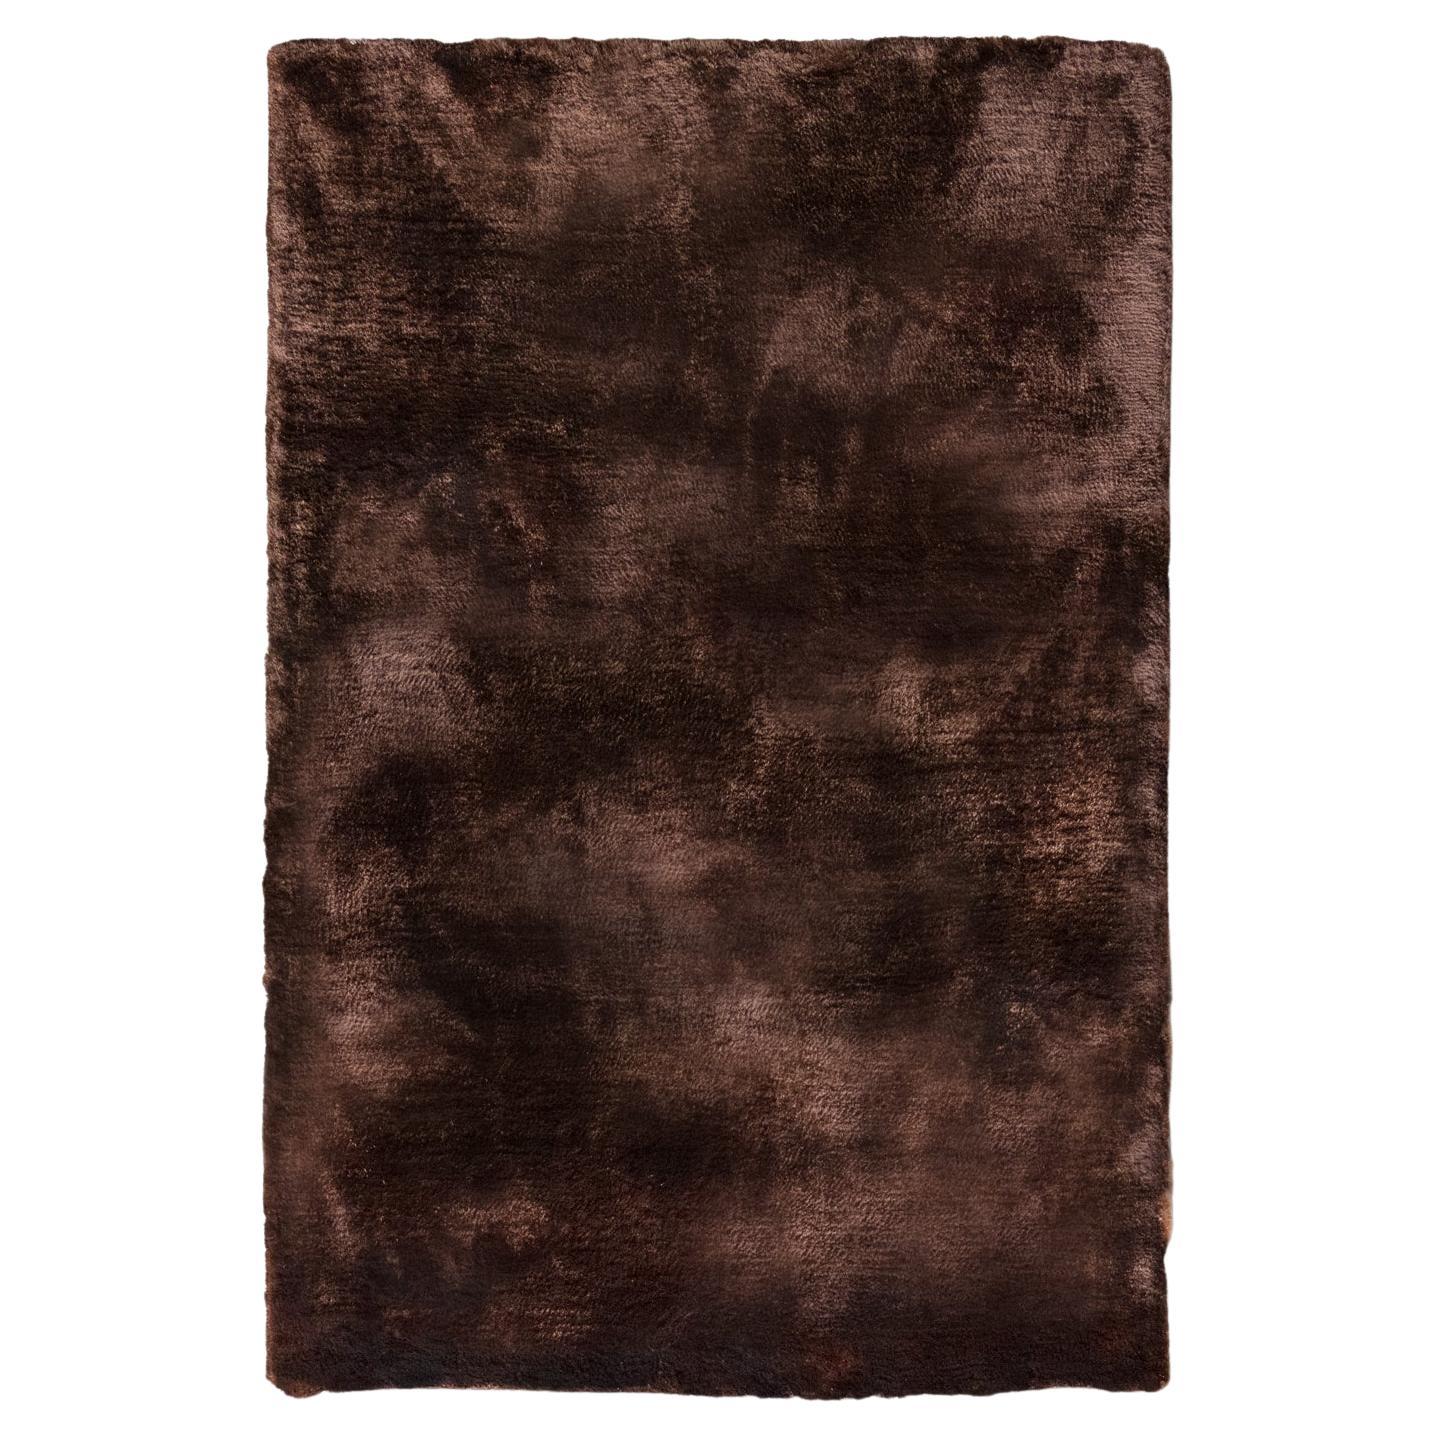 Contemporary Soft Cozy Design Brown Rug by Deanna Comellini In Stock 200x300 cm For Sale